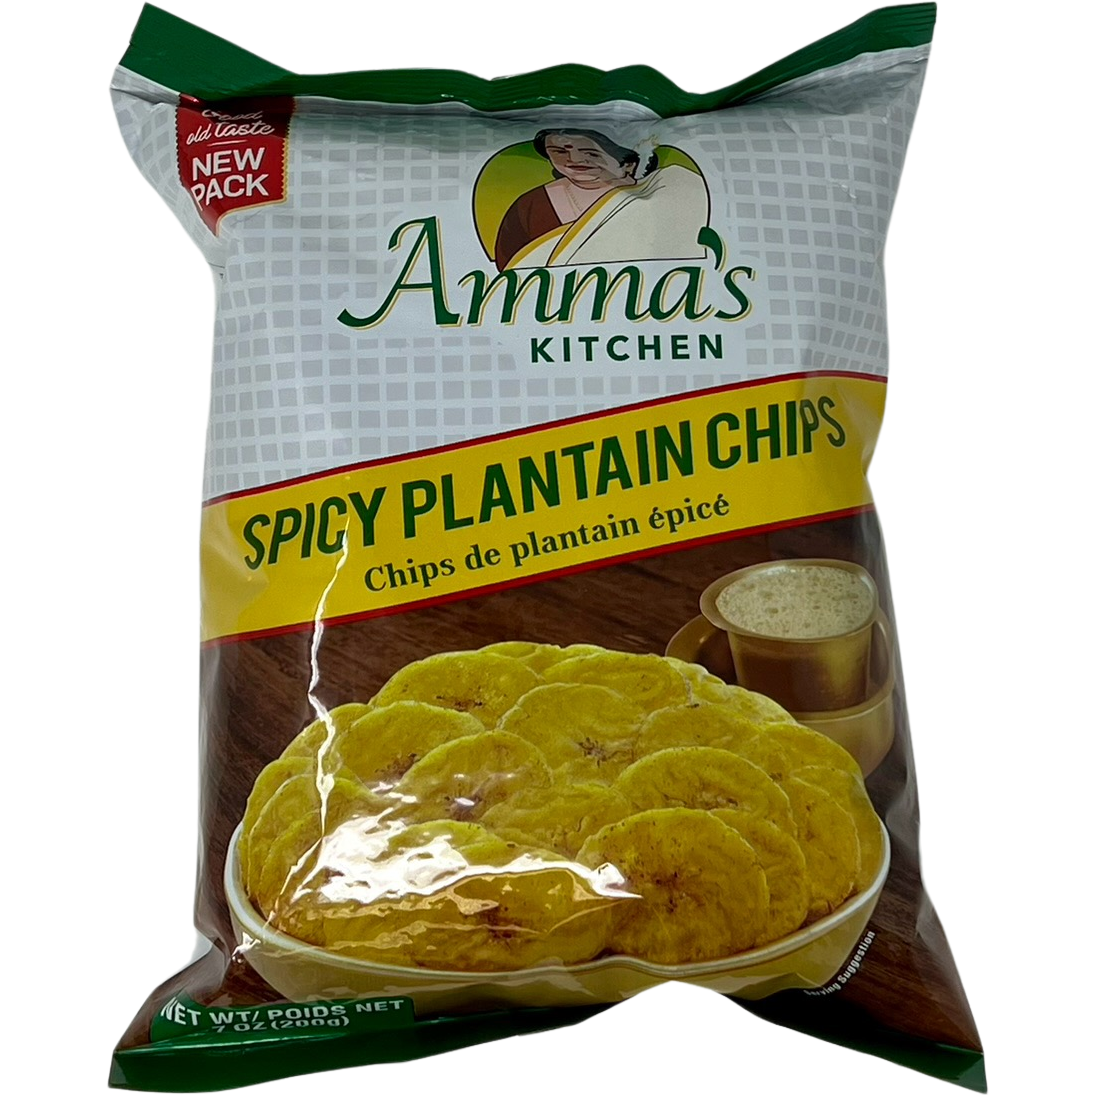 Pack of 2 - Amma's Kitchen Spicy Plantain Chips - 200 Gm (7 Oz)